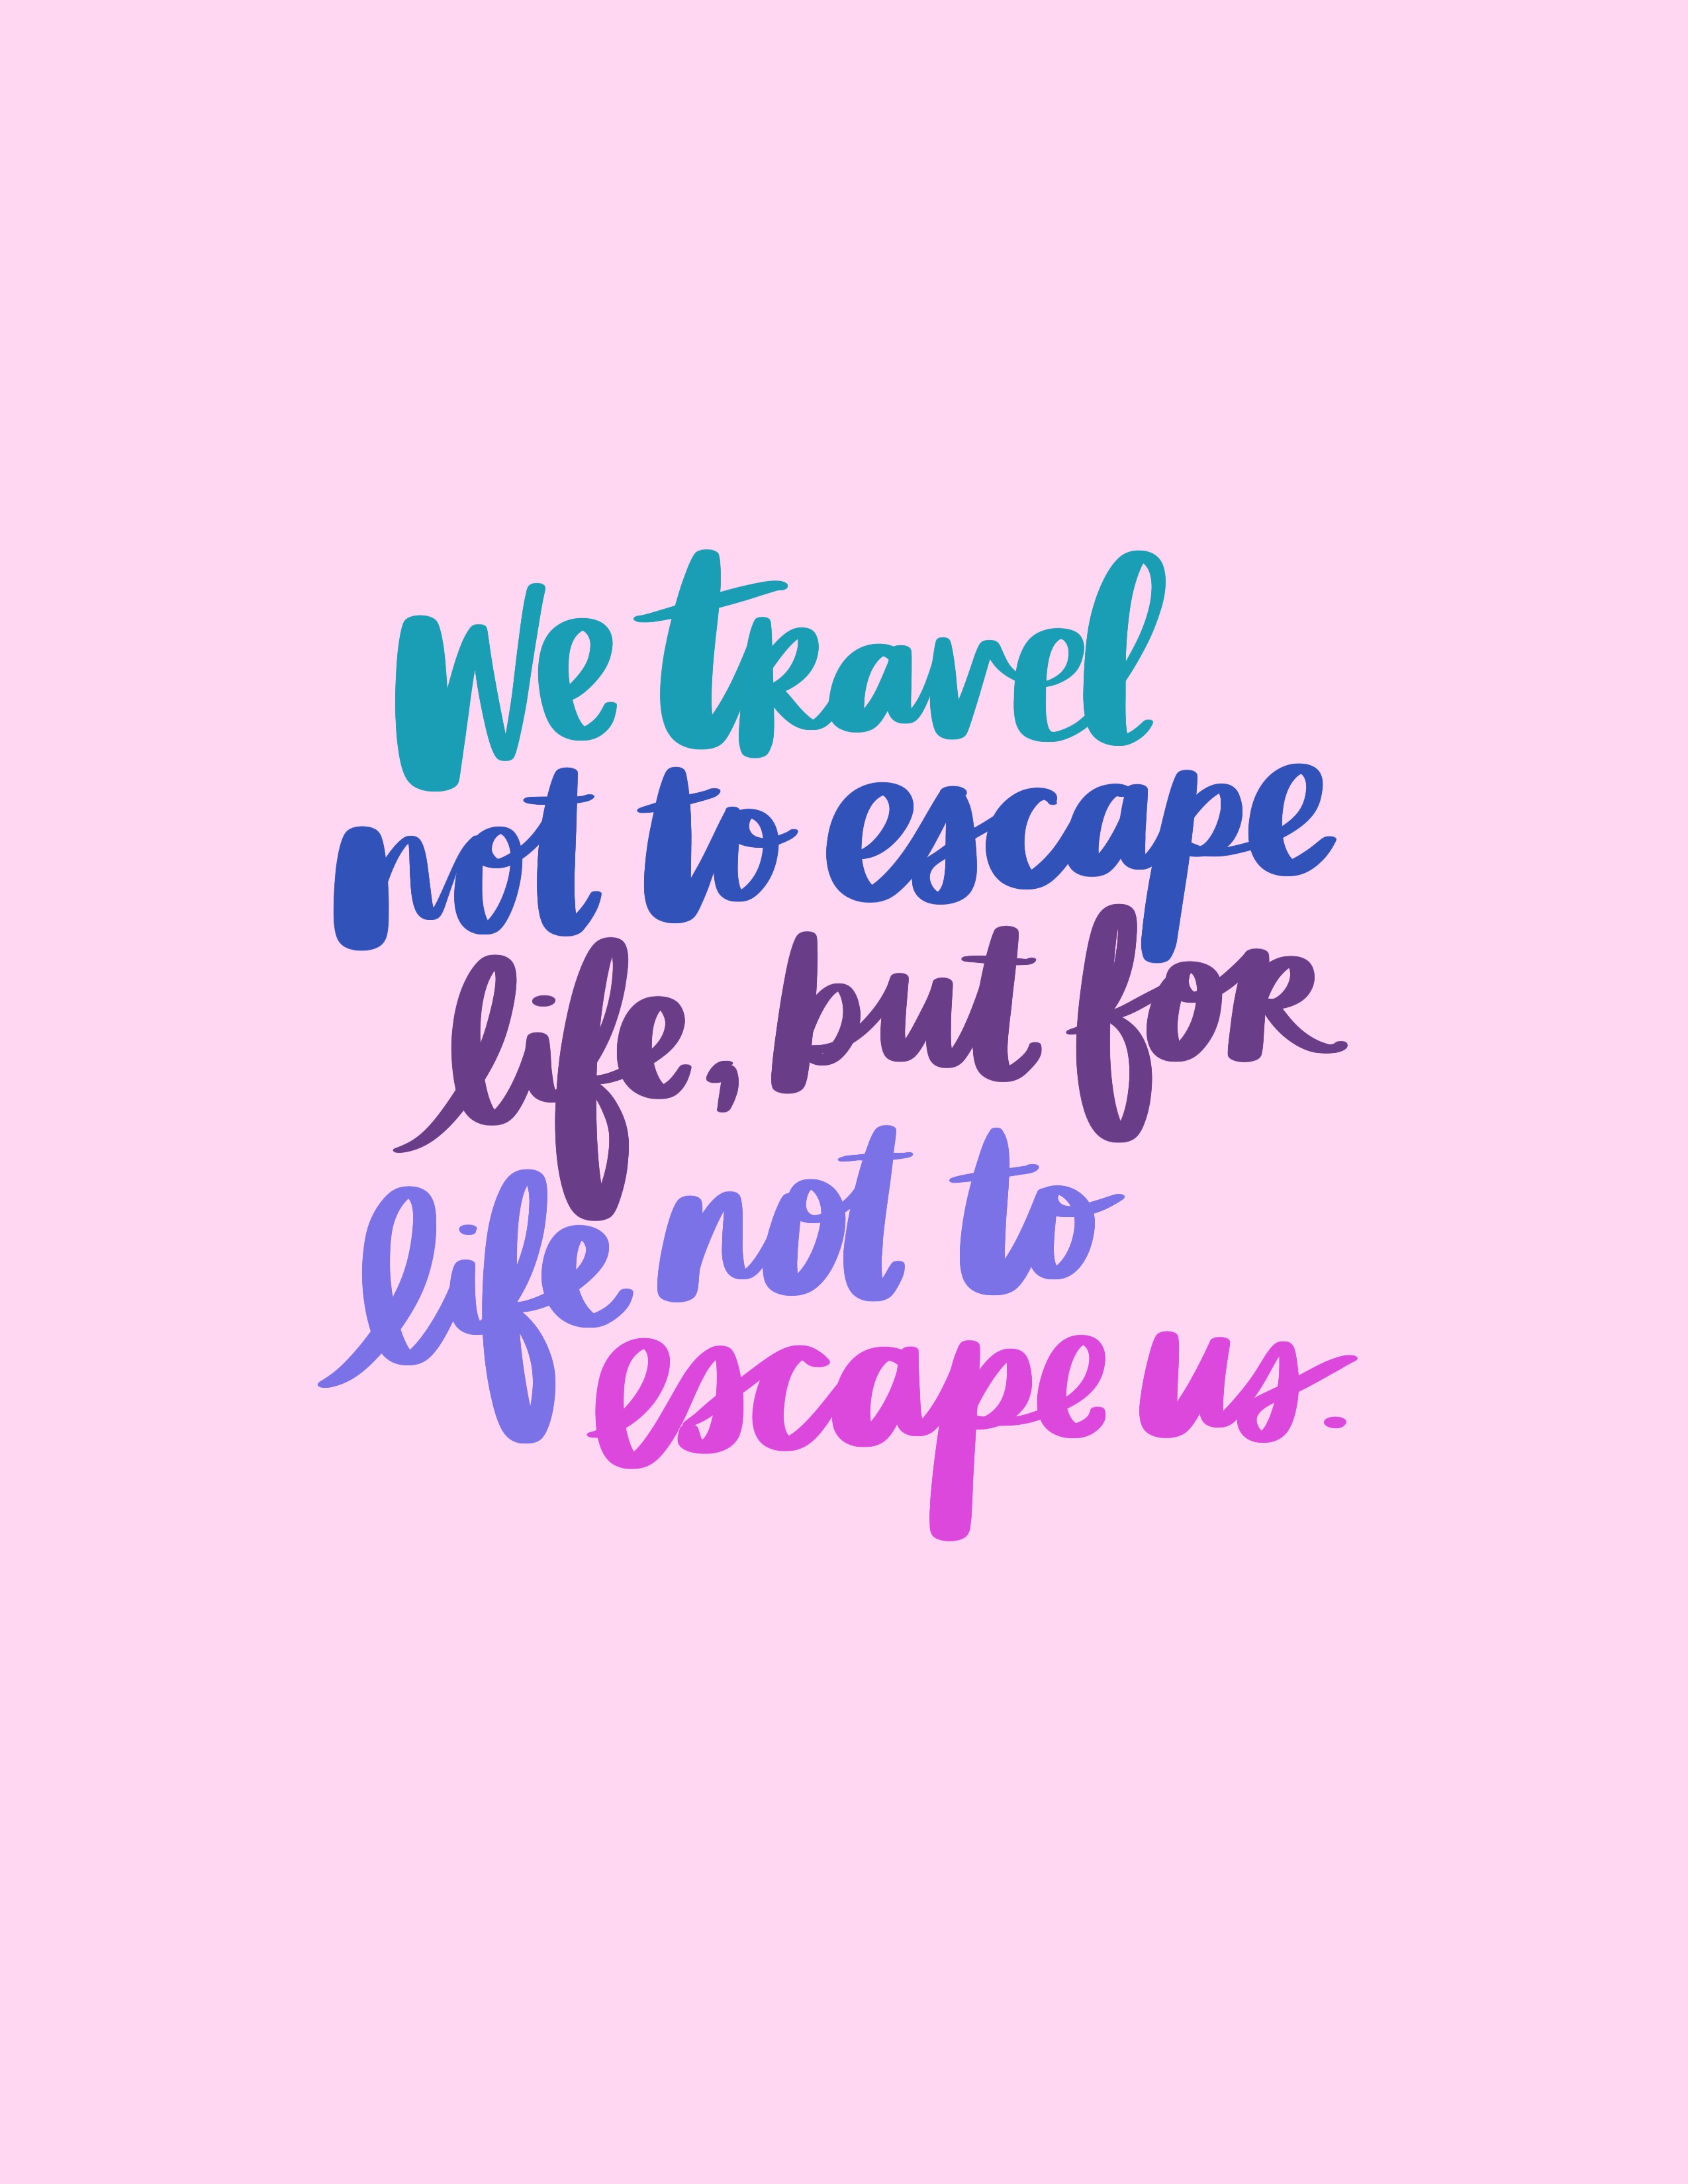 Why We Travel - Carrie Colbert